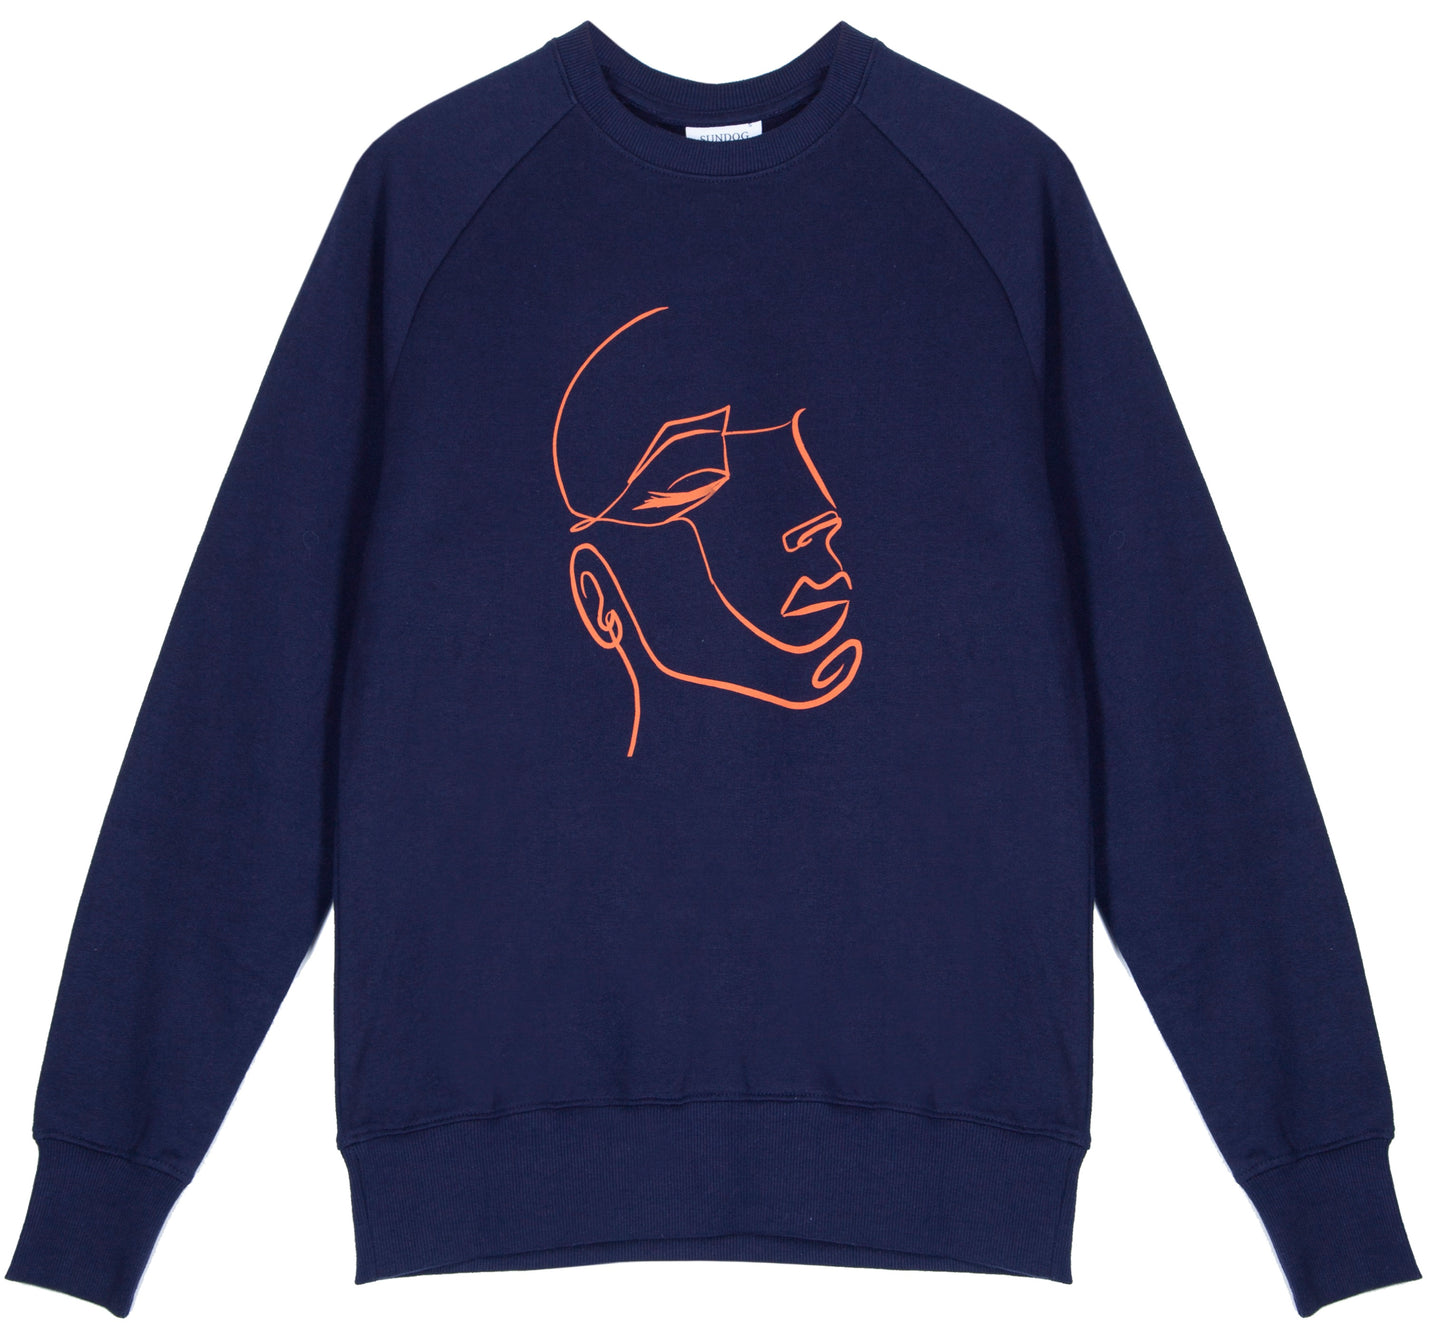 Unisex classic crew raglan sweatshirt, made from GOTS certified organic cotton with FaceIN print in Clementine colour printed with plastic free inks